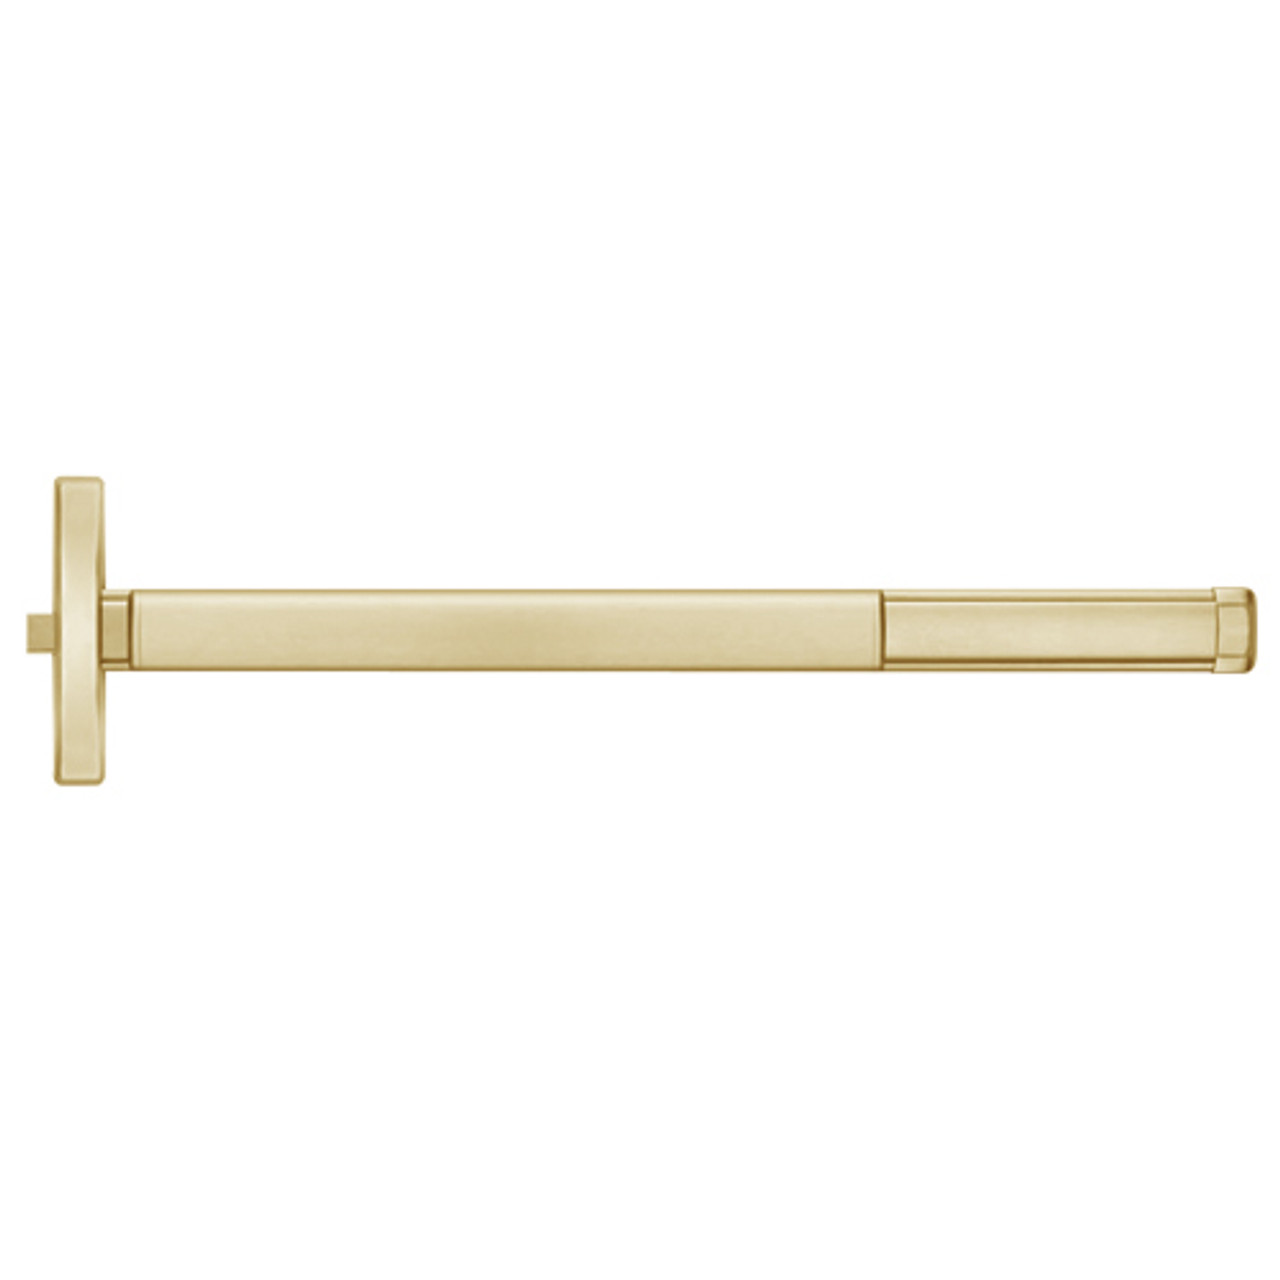 MLR2408-606-36 PHI 2400 Series Non Fire Rated Apex Rim Exit Device with Motorized Latch Retraction Prepped for Key Controls Lever in Satin Brass Finish